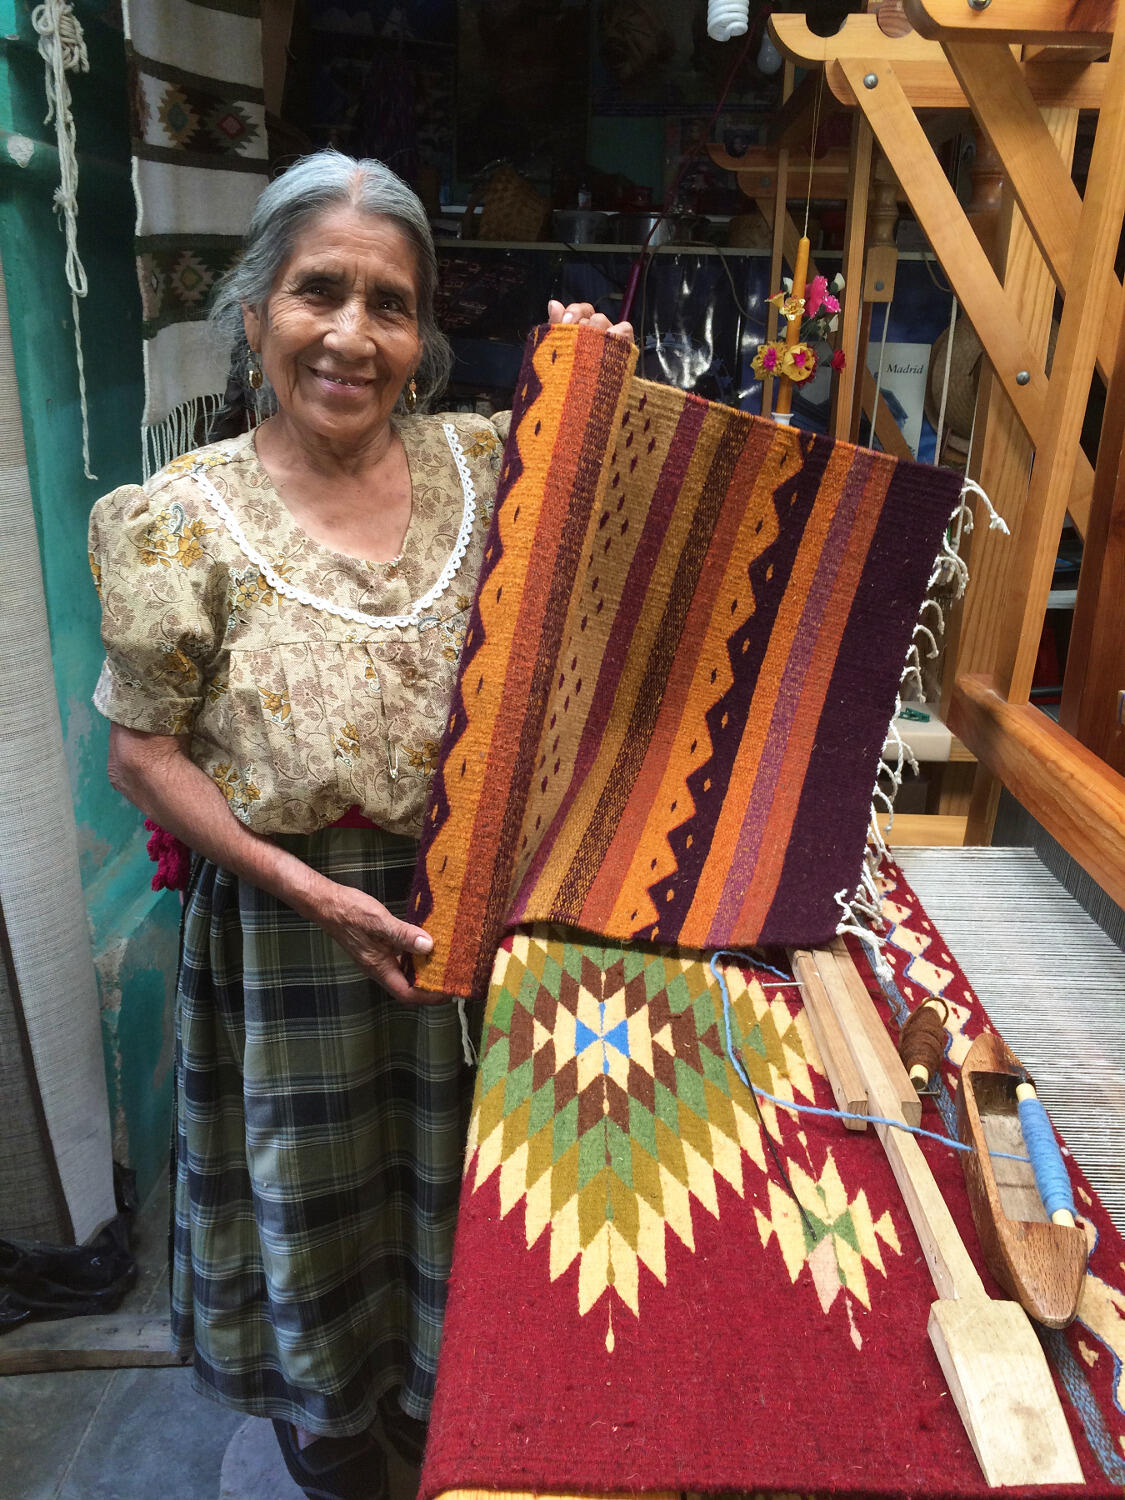 A Teotitlán del Valle craftswoman holds up the handwoven rug Cydni Gordon purchased from her as a gift to take back to her grandmother.